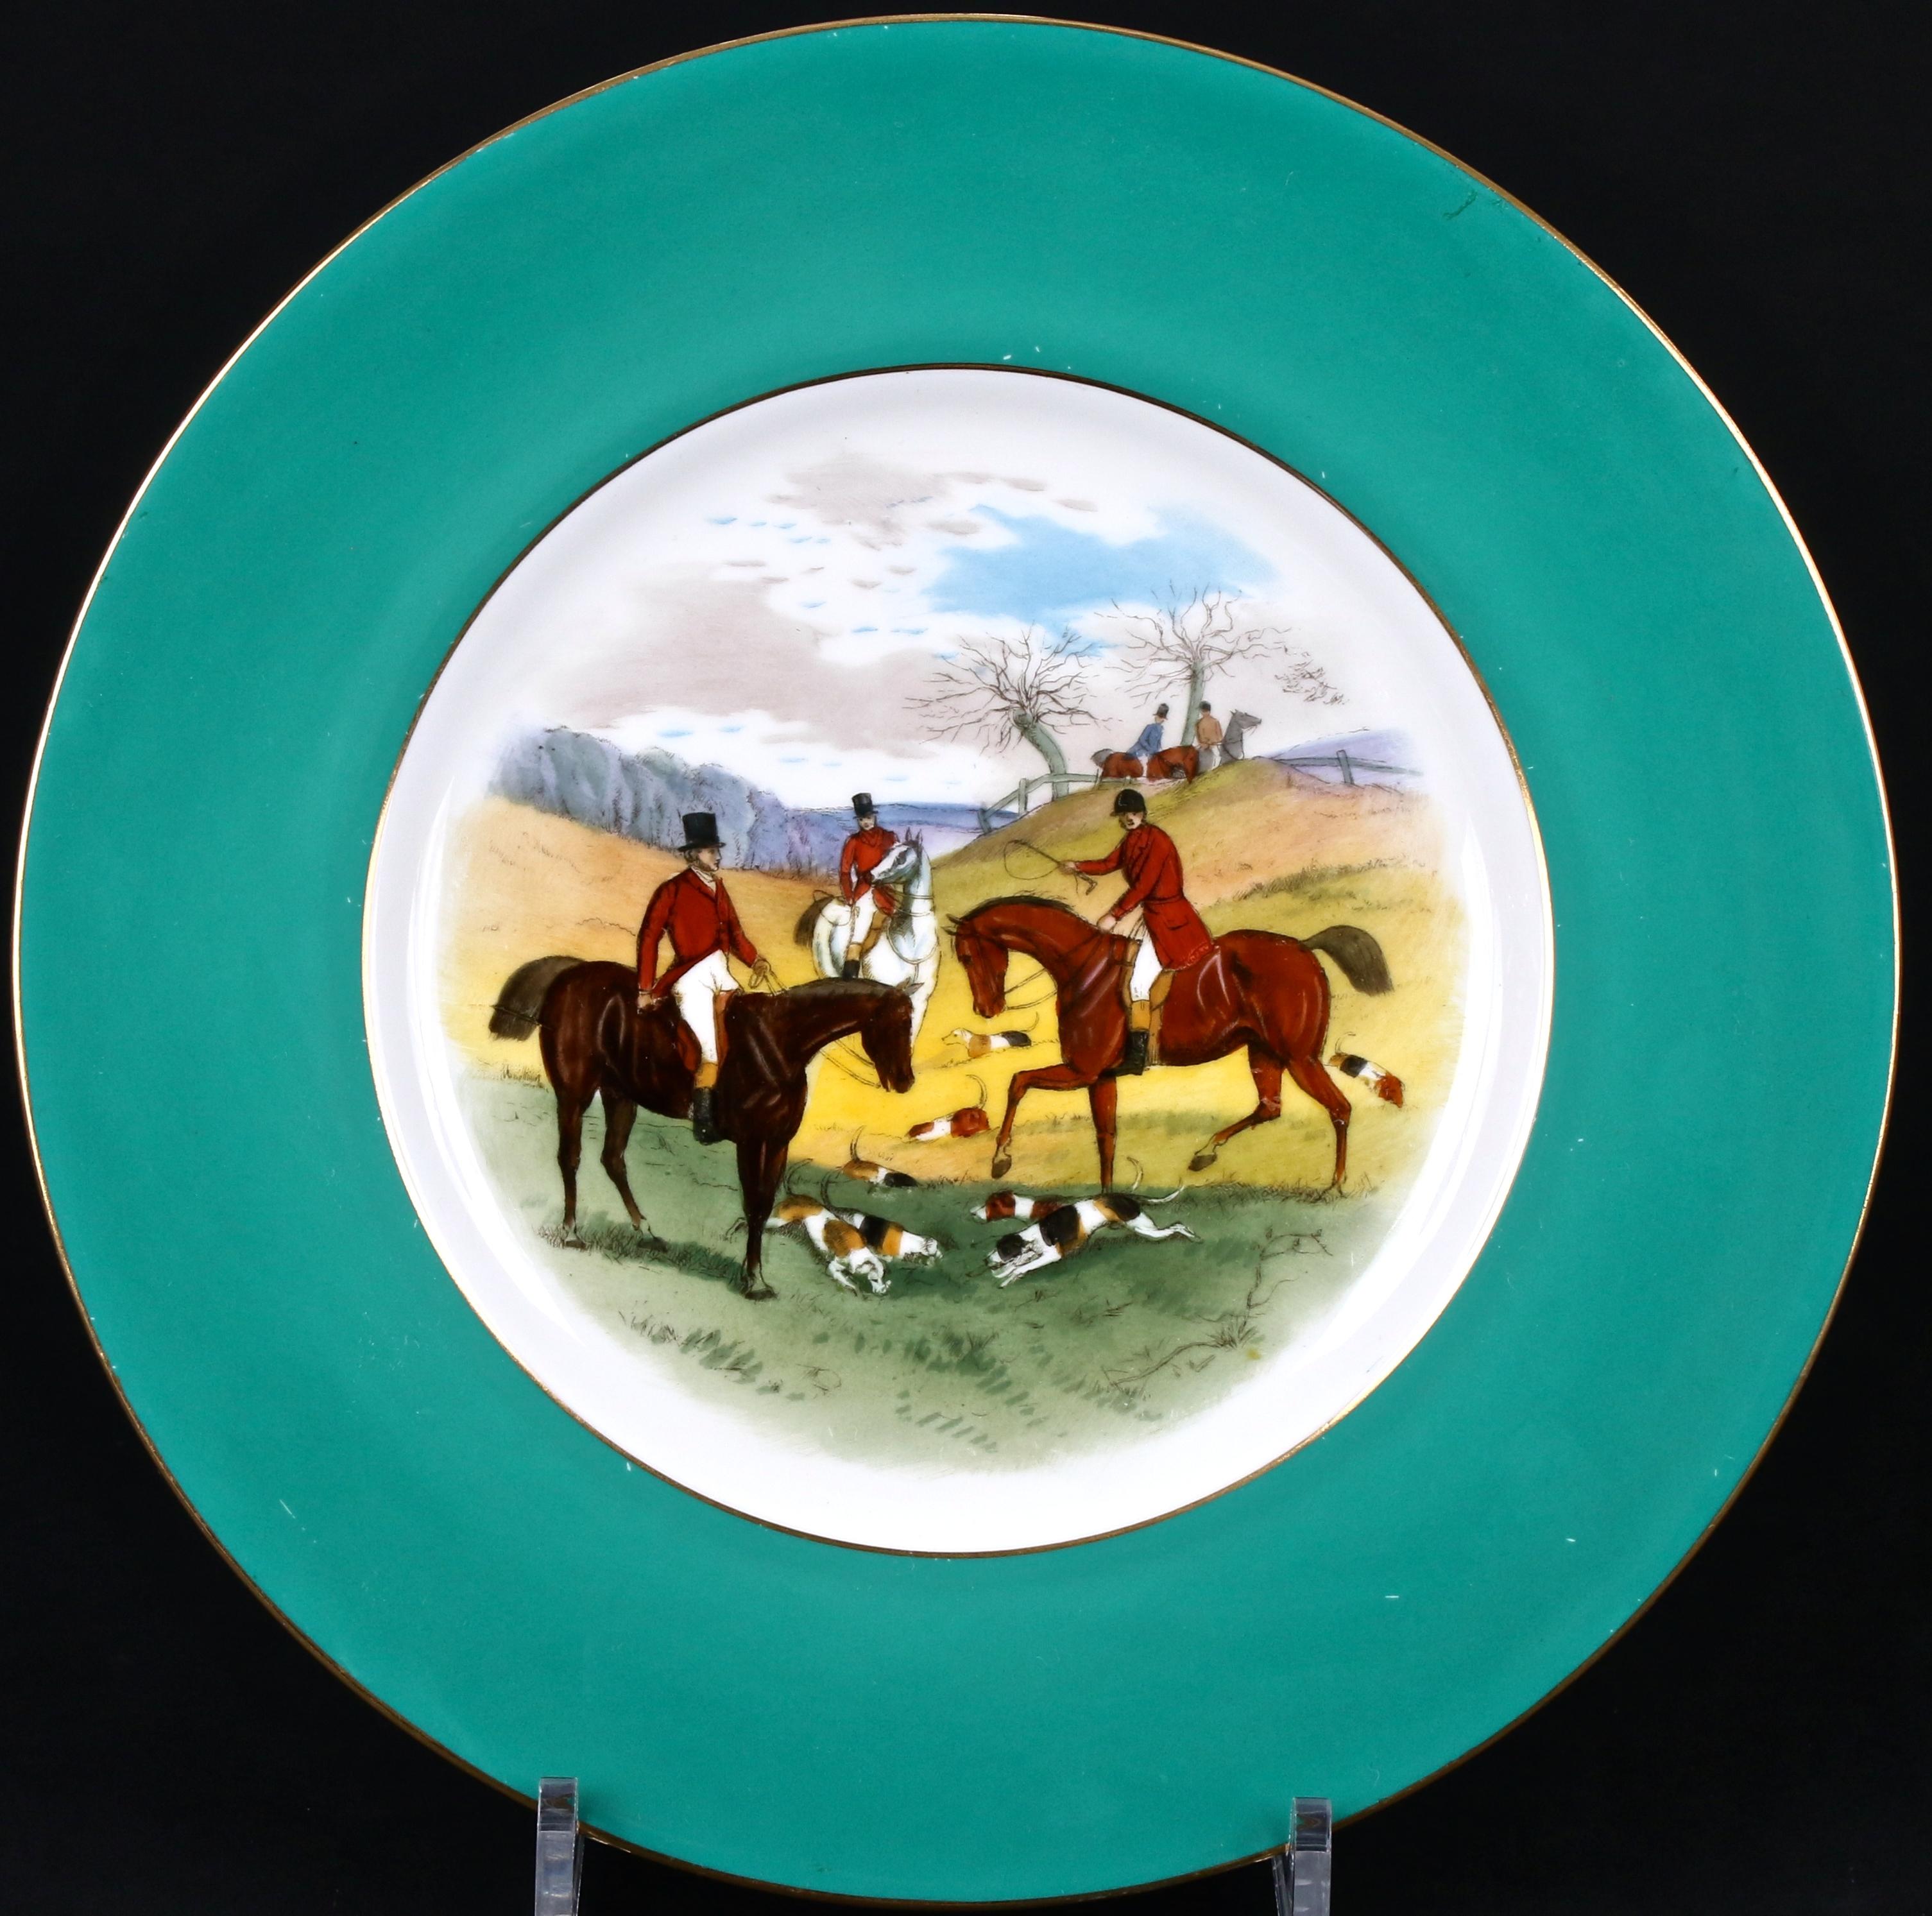 These 12 fox hunt cabinet or dinner plates are from Minton, Stoke-on-Trent, England. Each green-bordered plate depicts a unique English fox hunting scene. Painted by famous Minton artist James Edwin Dean (1880-1935), who specialized in fish, game,